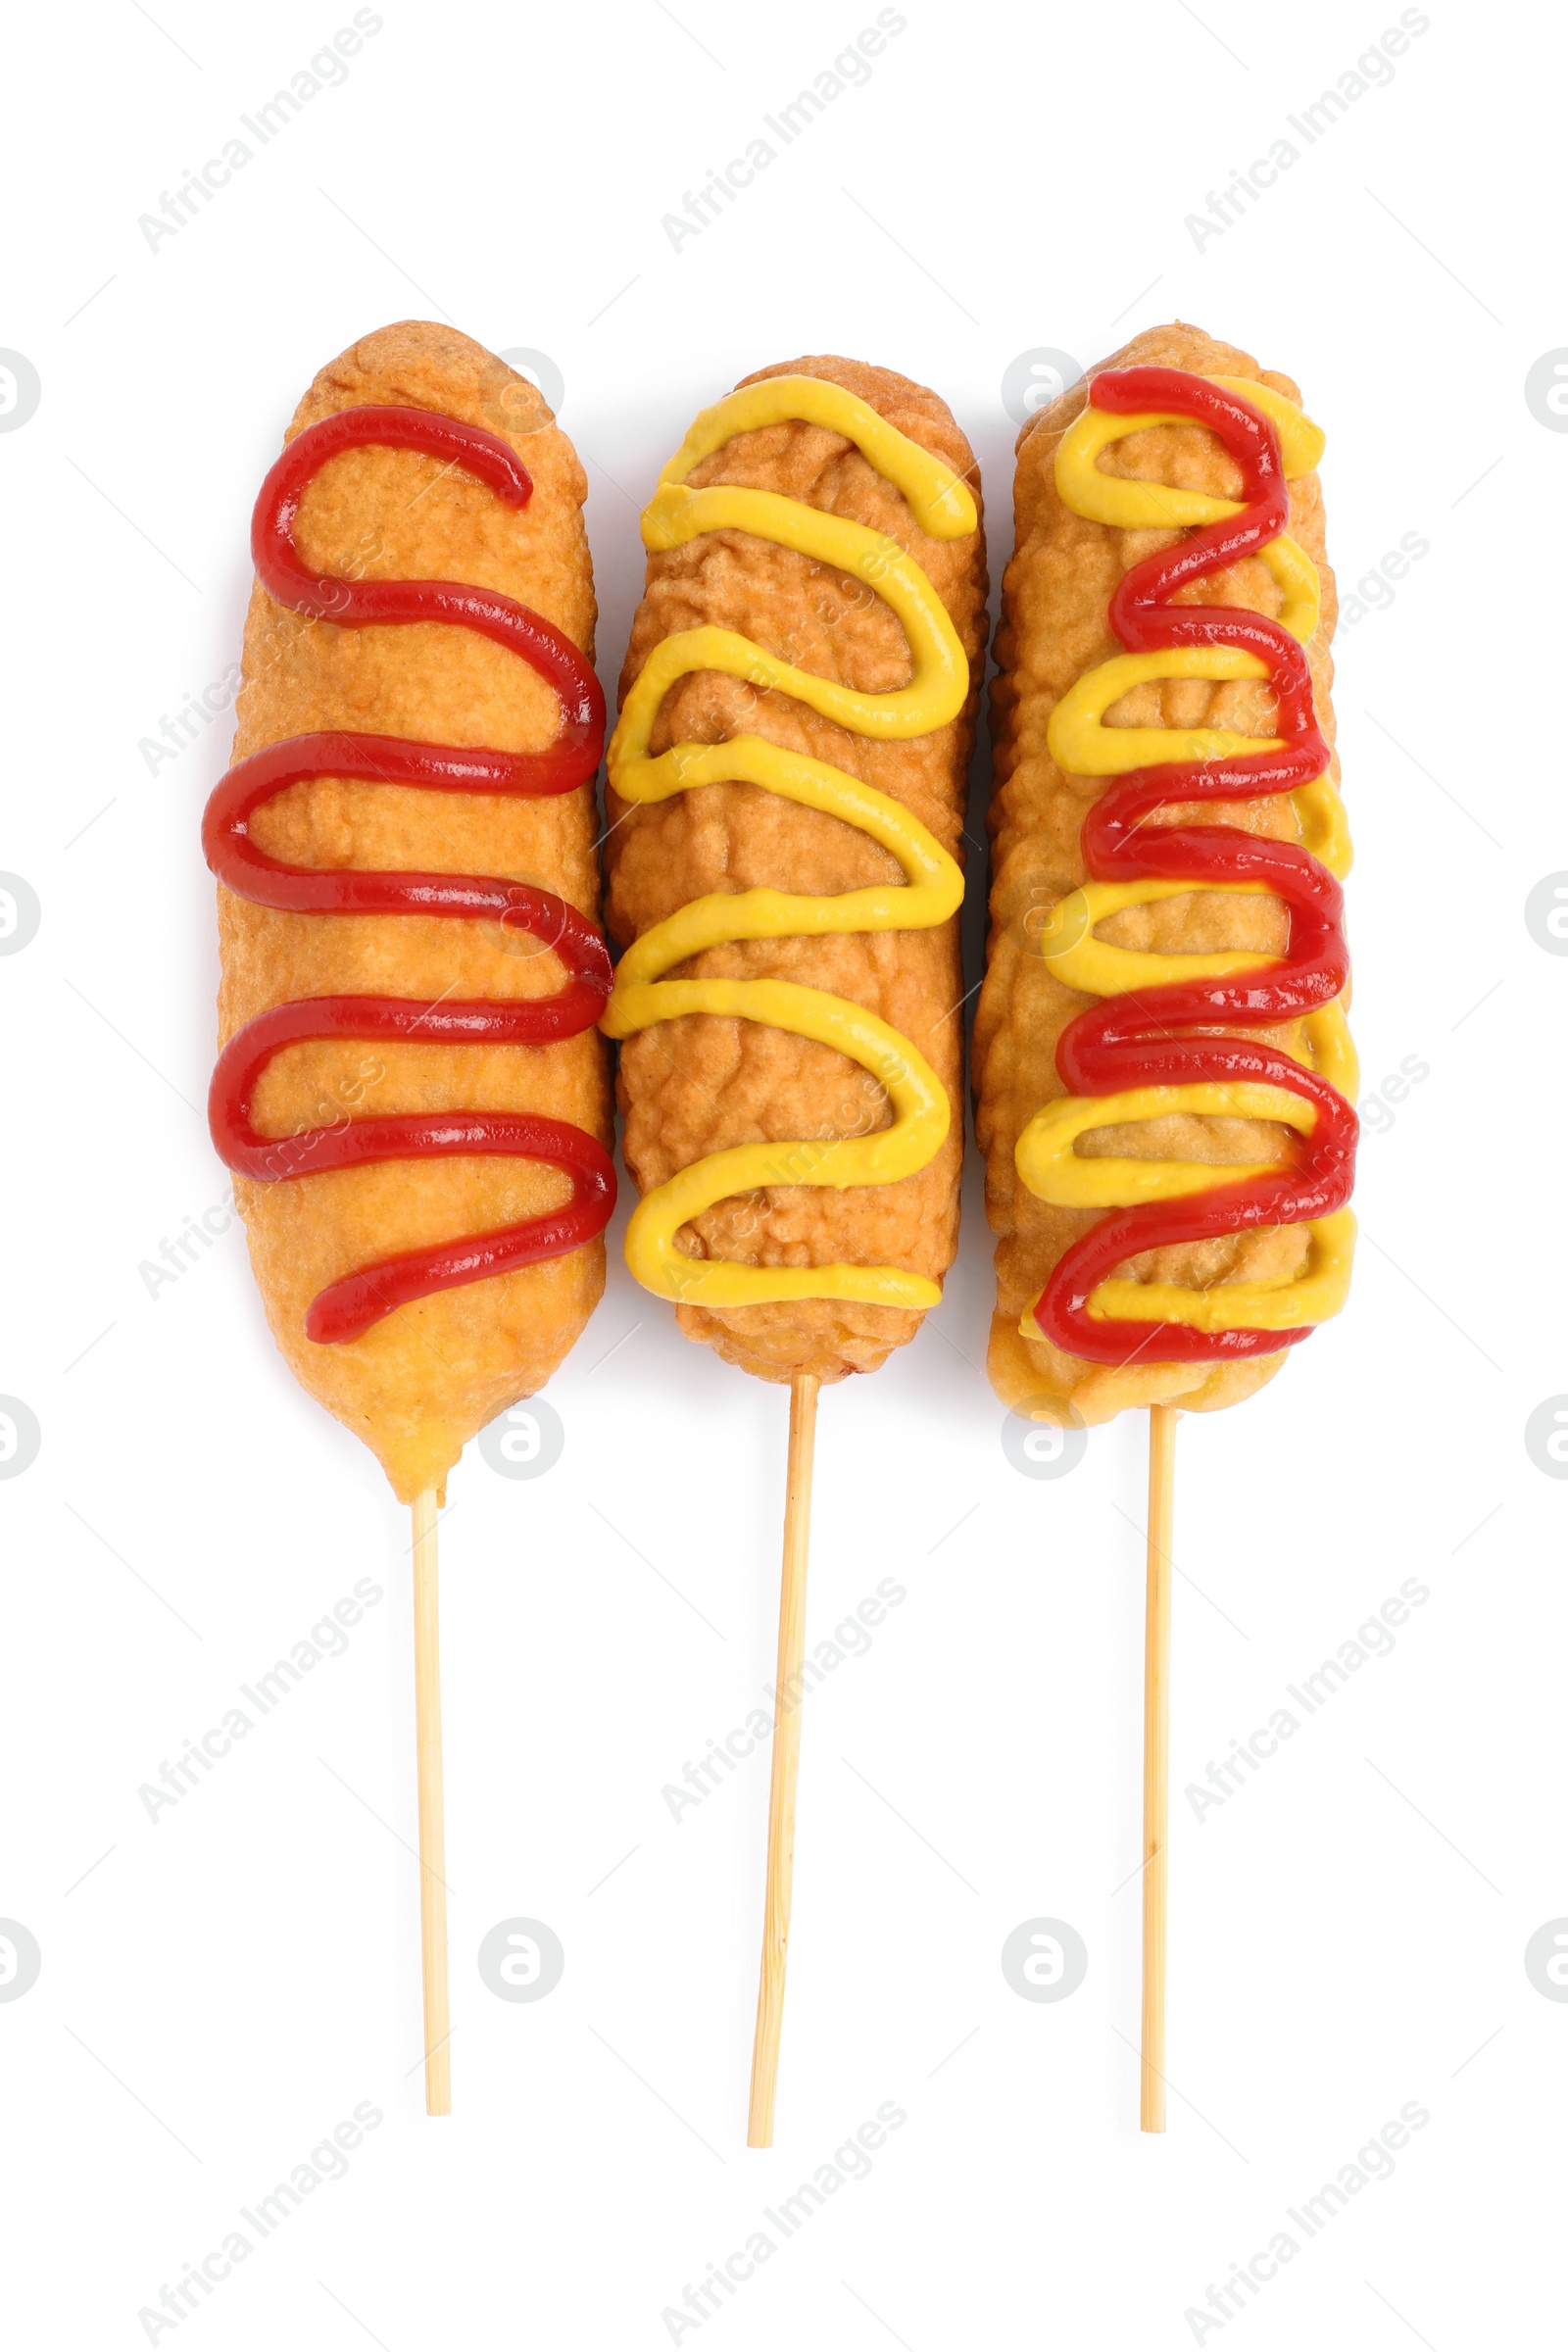 Photo of Delicious deep fried corn dogs with sauces on white background, top view